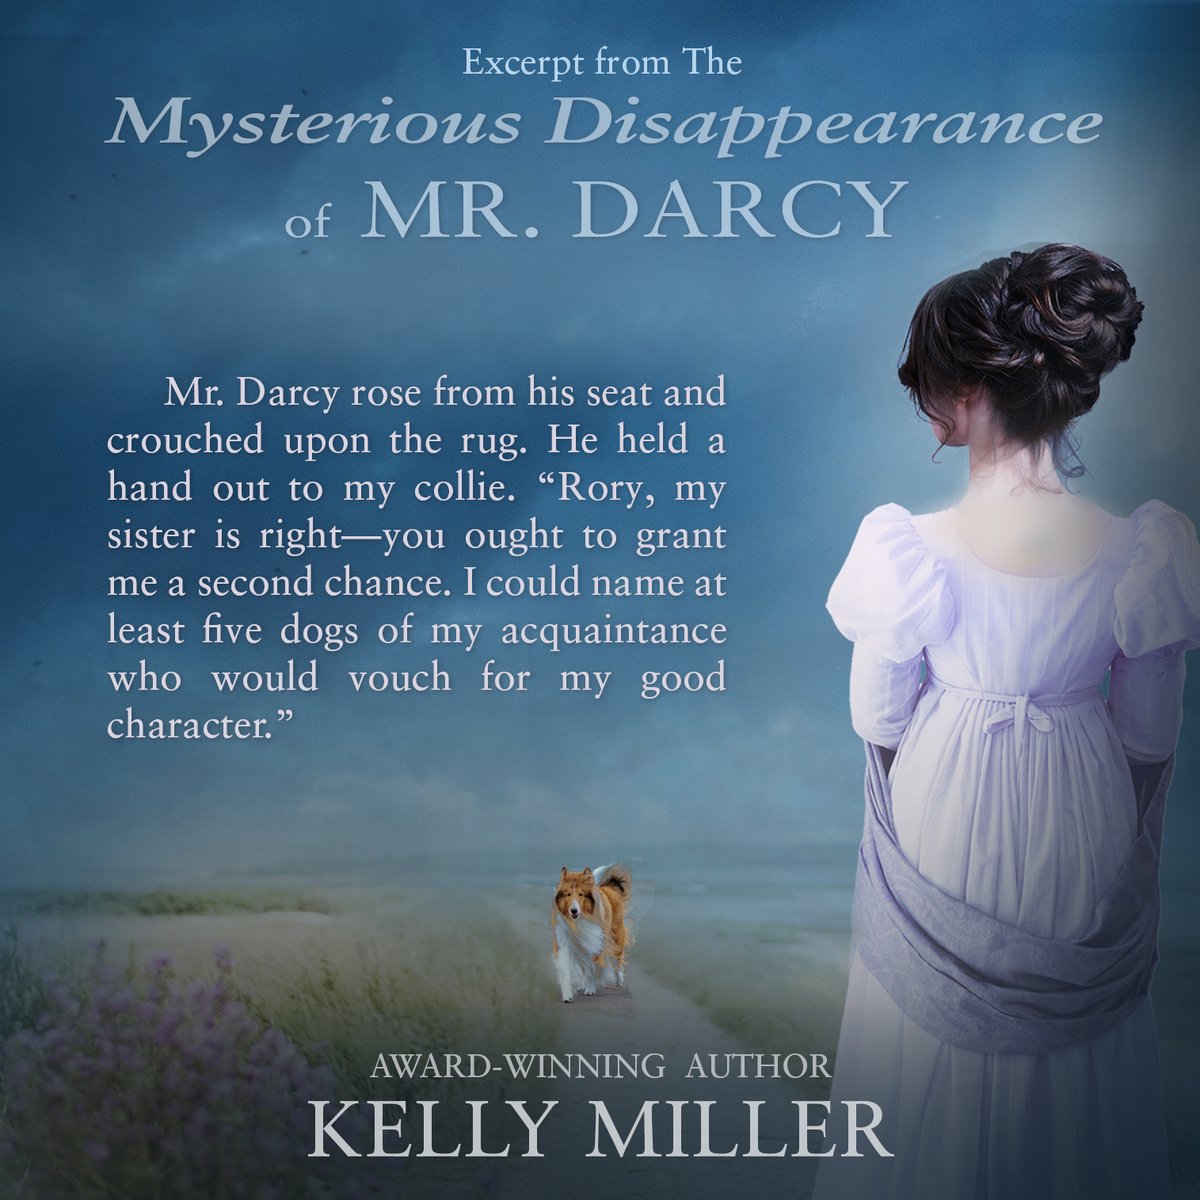 “The Mysterious Disappearance of Mr. Darcy,” a #Regency #PrideandPrejudice #Mystery #Romance, is out now! Mr. Darcy is missing, Elizabeth is frantic, and rumours are swirling! On #KindleUnlimited! bookgoodies.com/a/B0CW1D8T7J #BooksWorthReading #JaneAusten